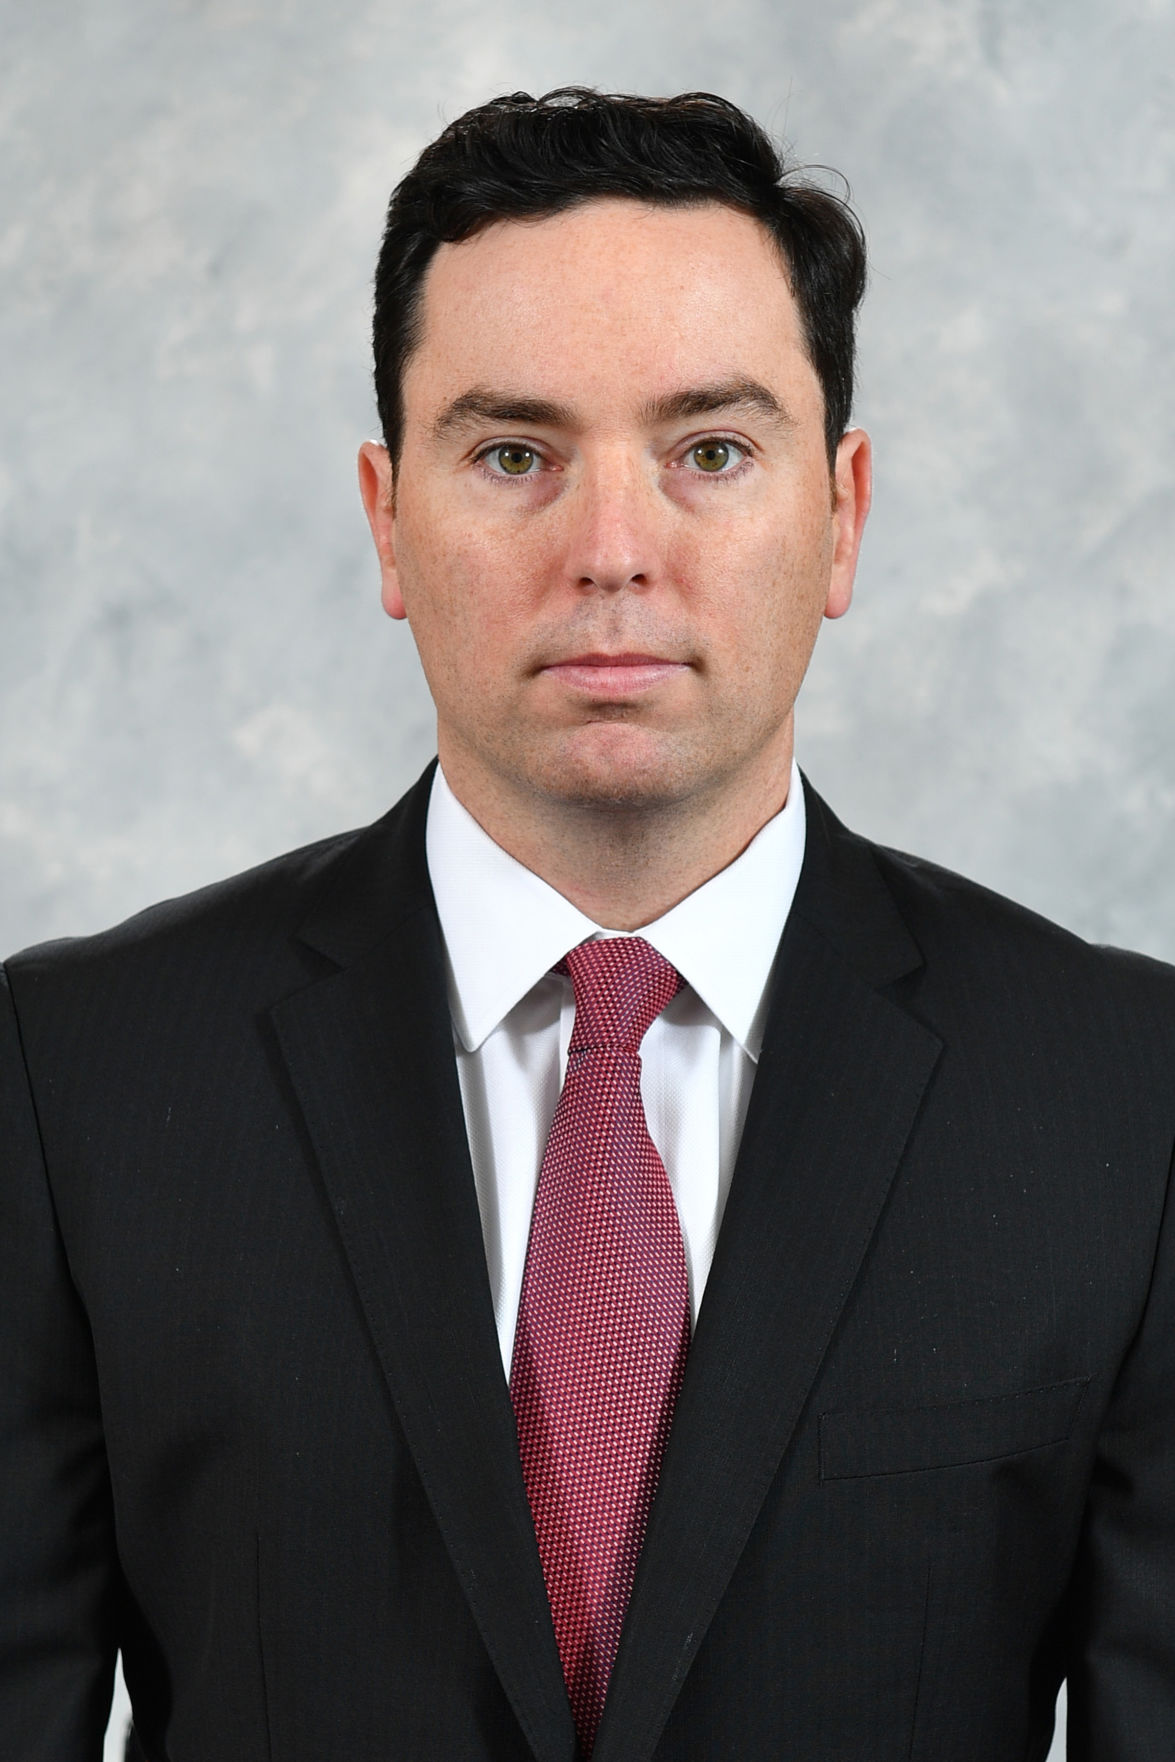 Longtime Nhl Assistant Woodcroft Named Head Coach Of Condors Sports 